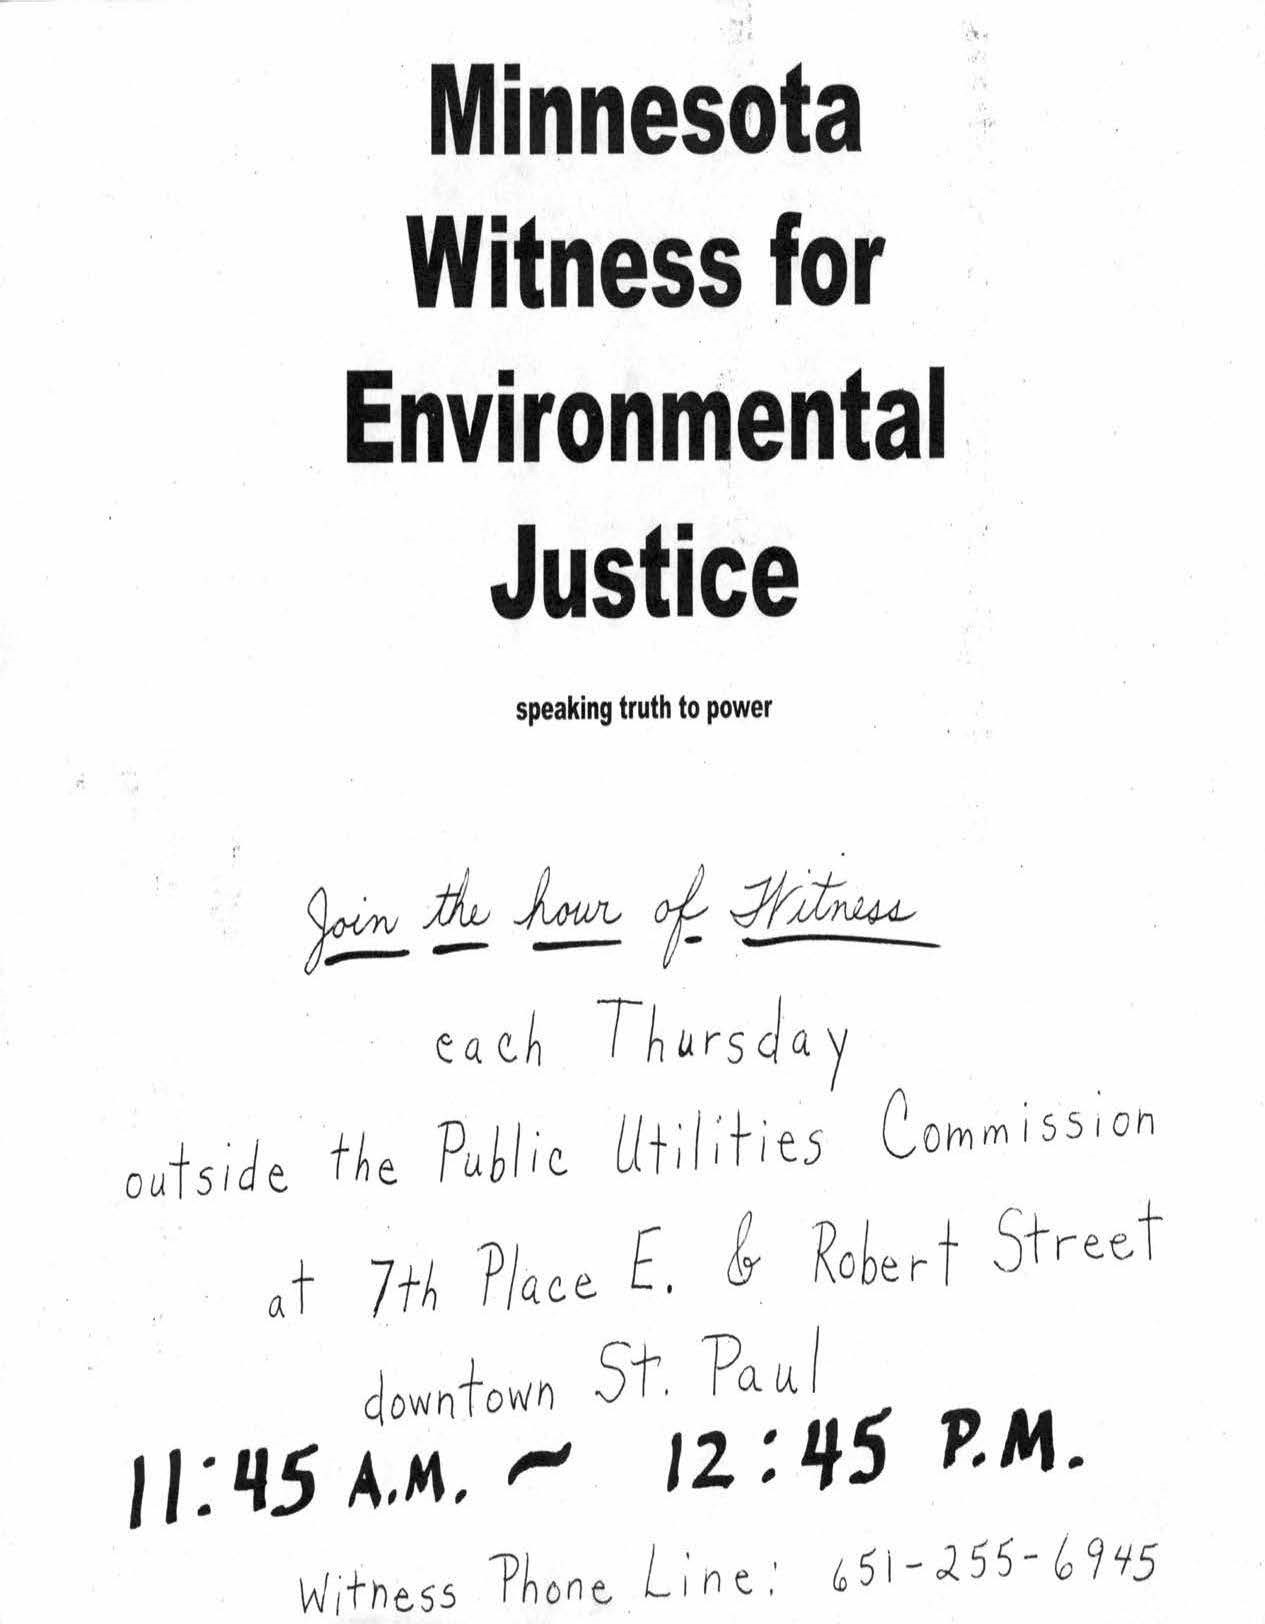 Minnesota Witness for Environmental Justice flyer, 1999